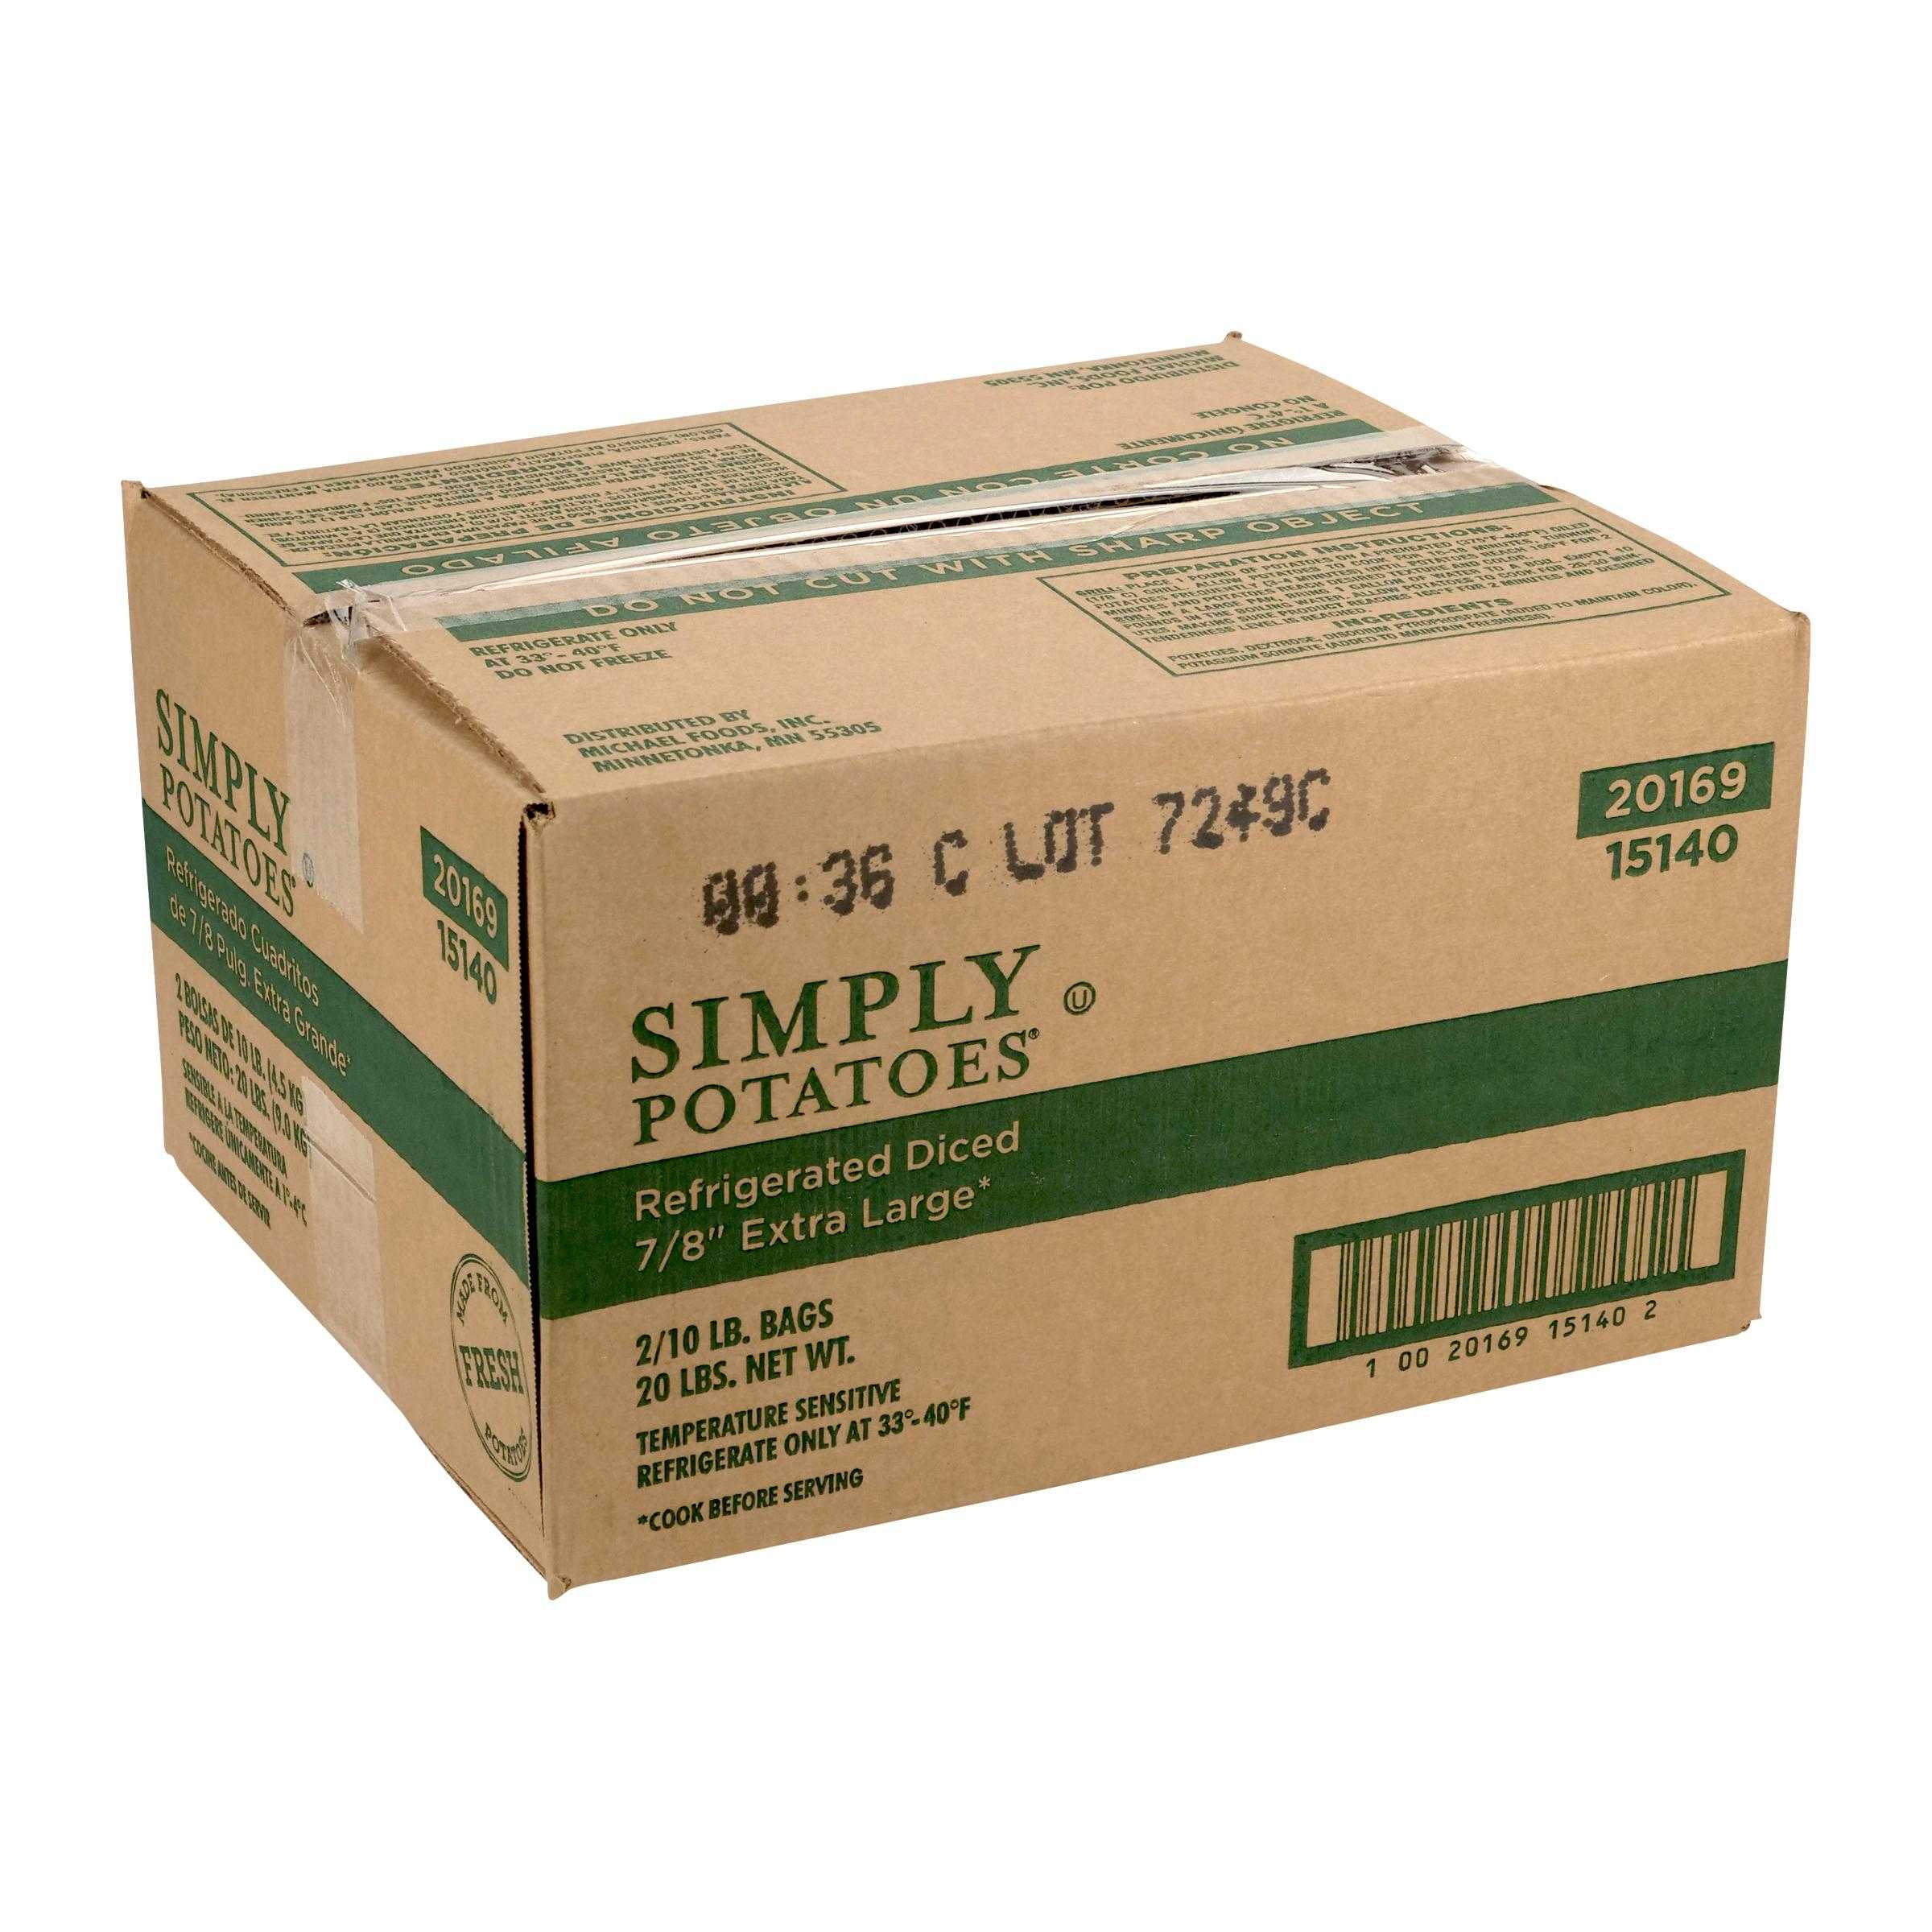 Simply Potatoes® Refrigerated 7/8″ Skinless Diced Potatoes made with peeled Russet potatoes diced dimensions 7/8″ x 7/8″ x 3/4″, 2/1